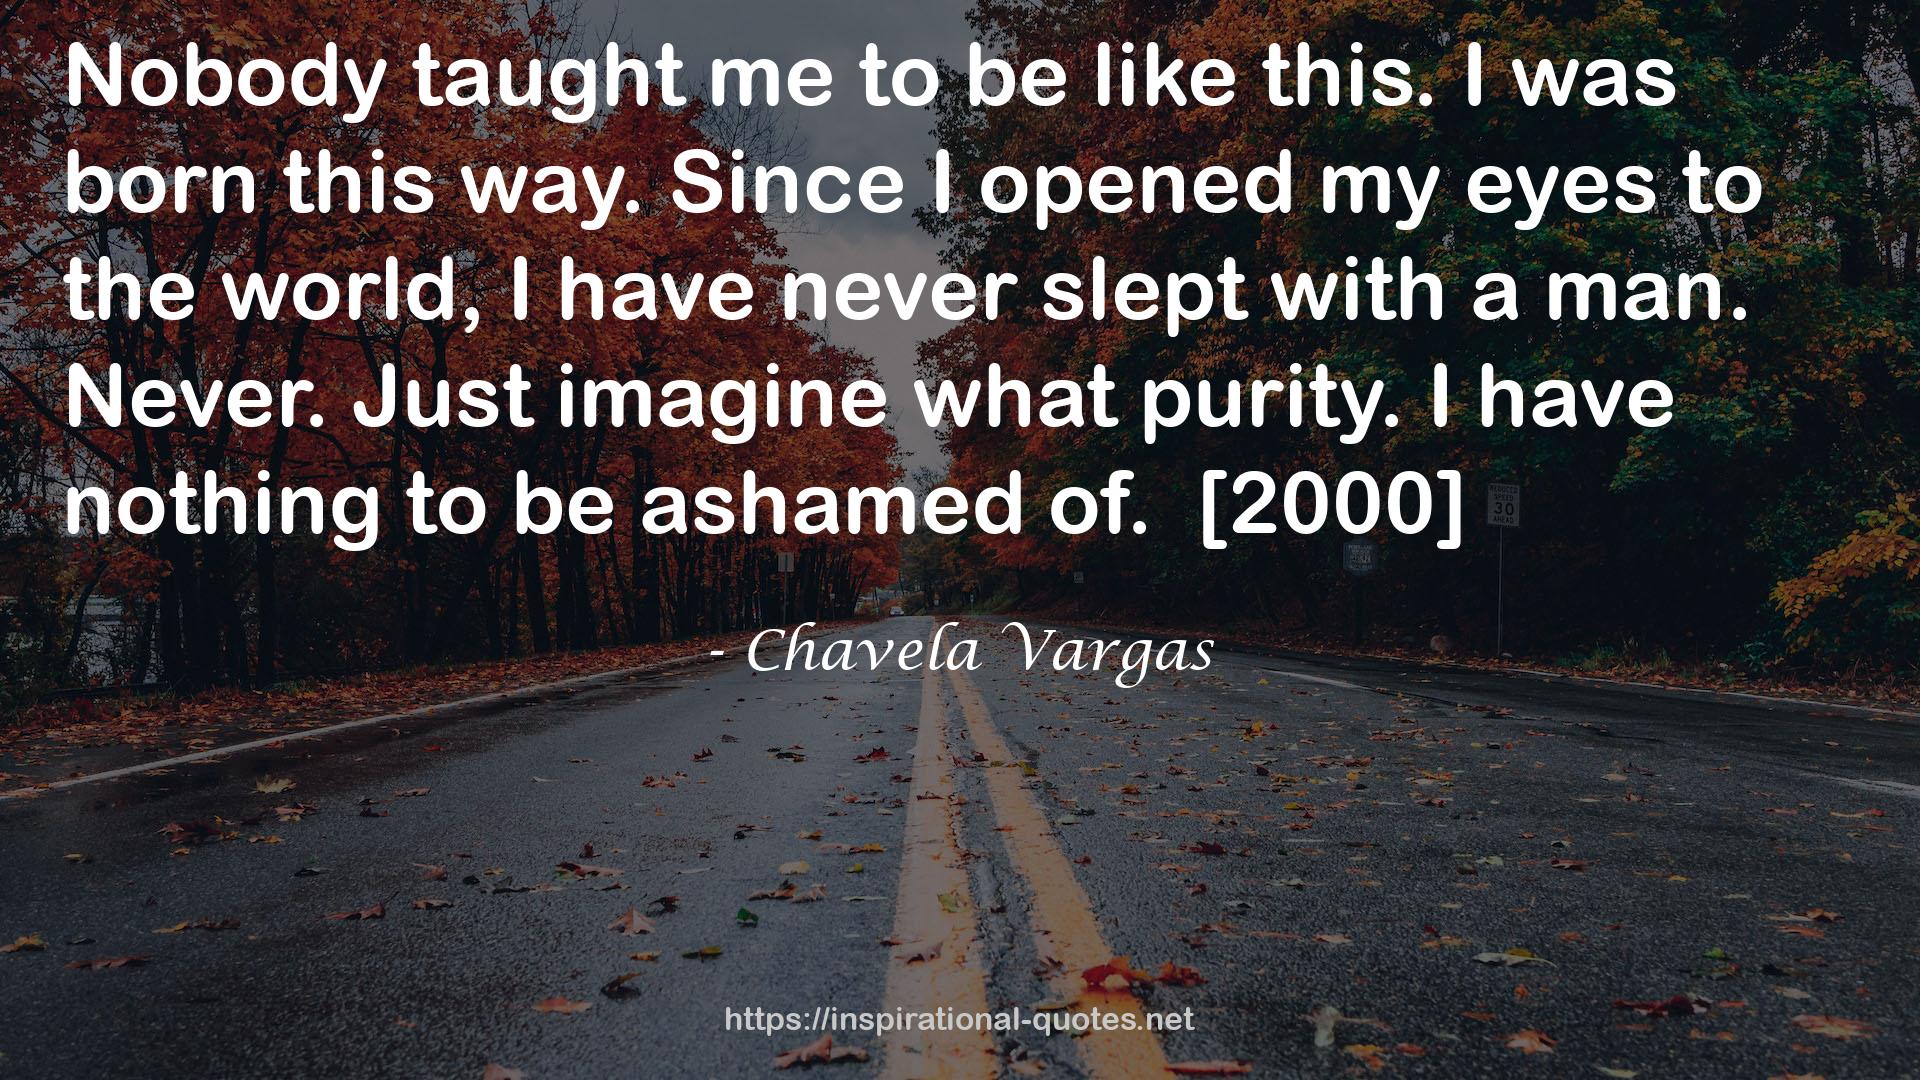 Chavela Vargas QUOTES